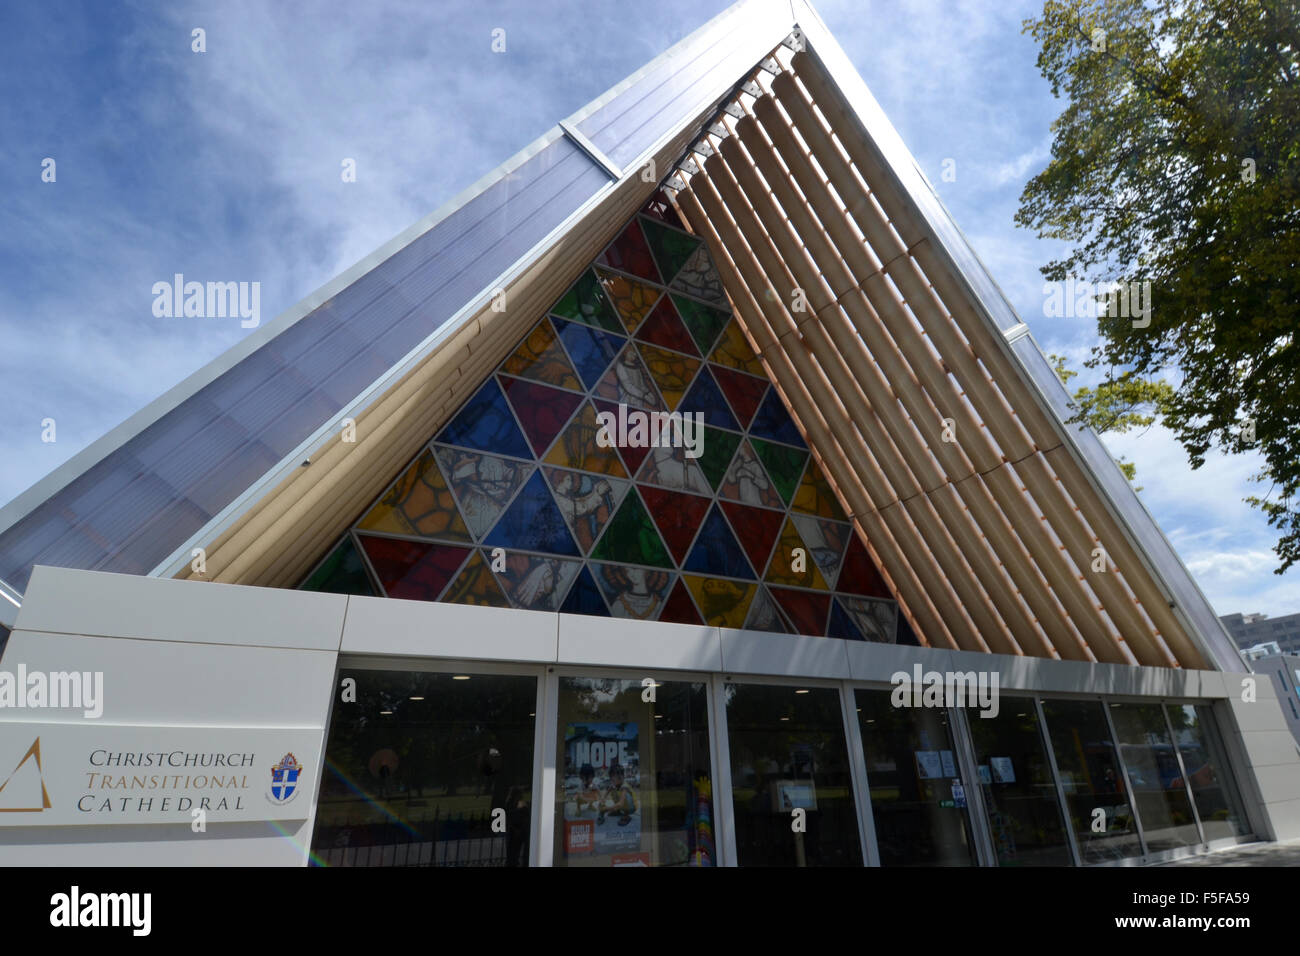 Cardboard Cathedral, transitional church designed by architect Shigeru Ban and made of cardboard, Christchurch, New Zealand Stock Photo